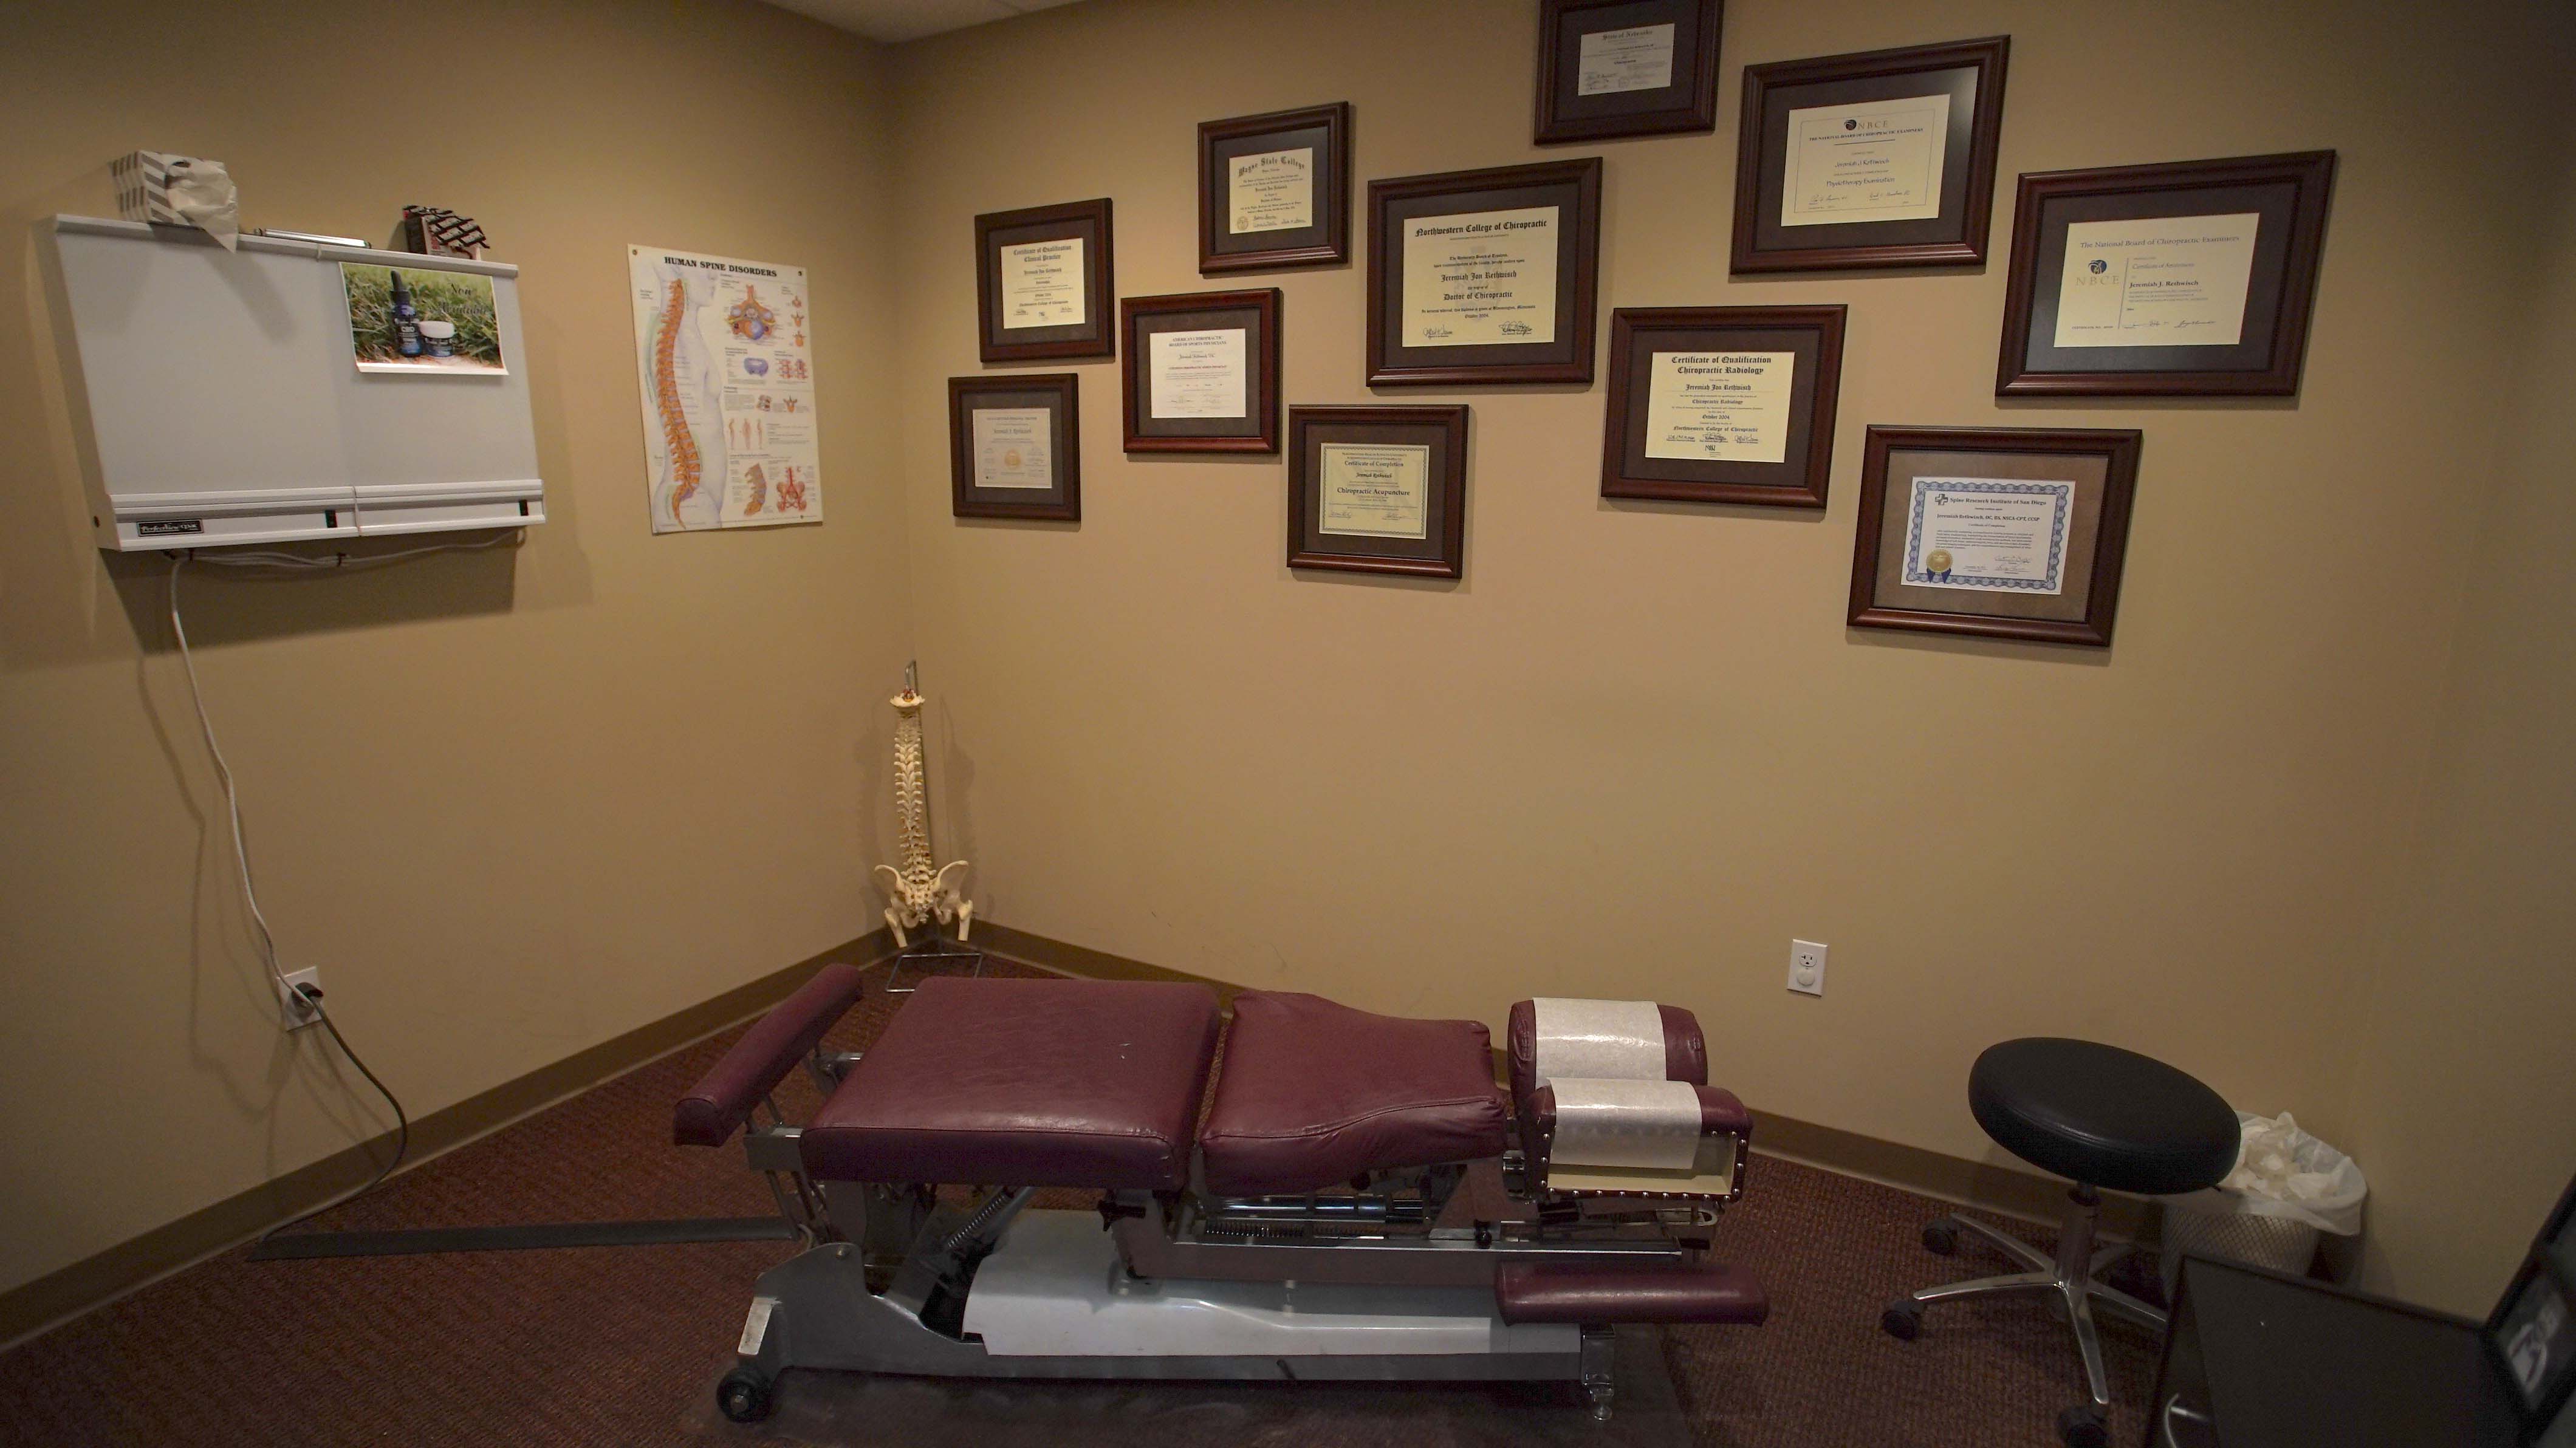 Treatment room with adjusting table and plaques on wall